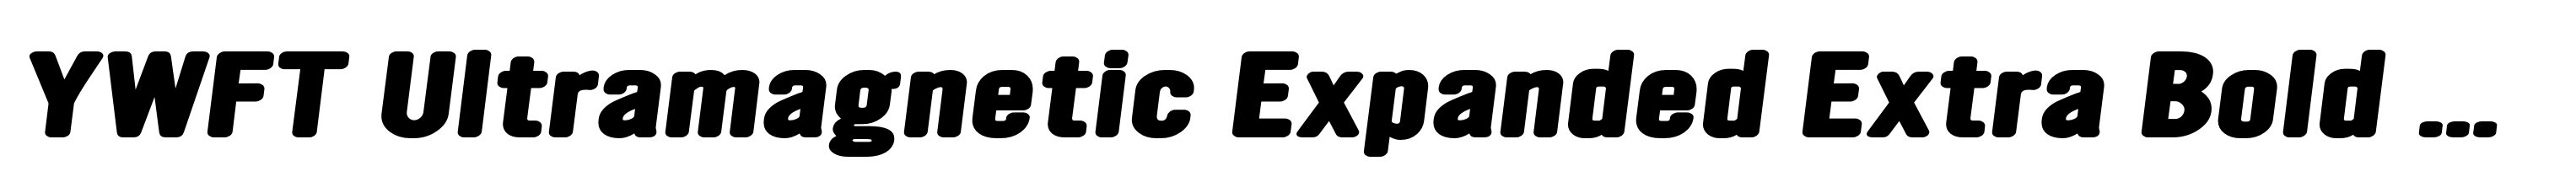 YWFT Ultramagnetic Expanded Extra Bold Oblique